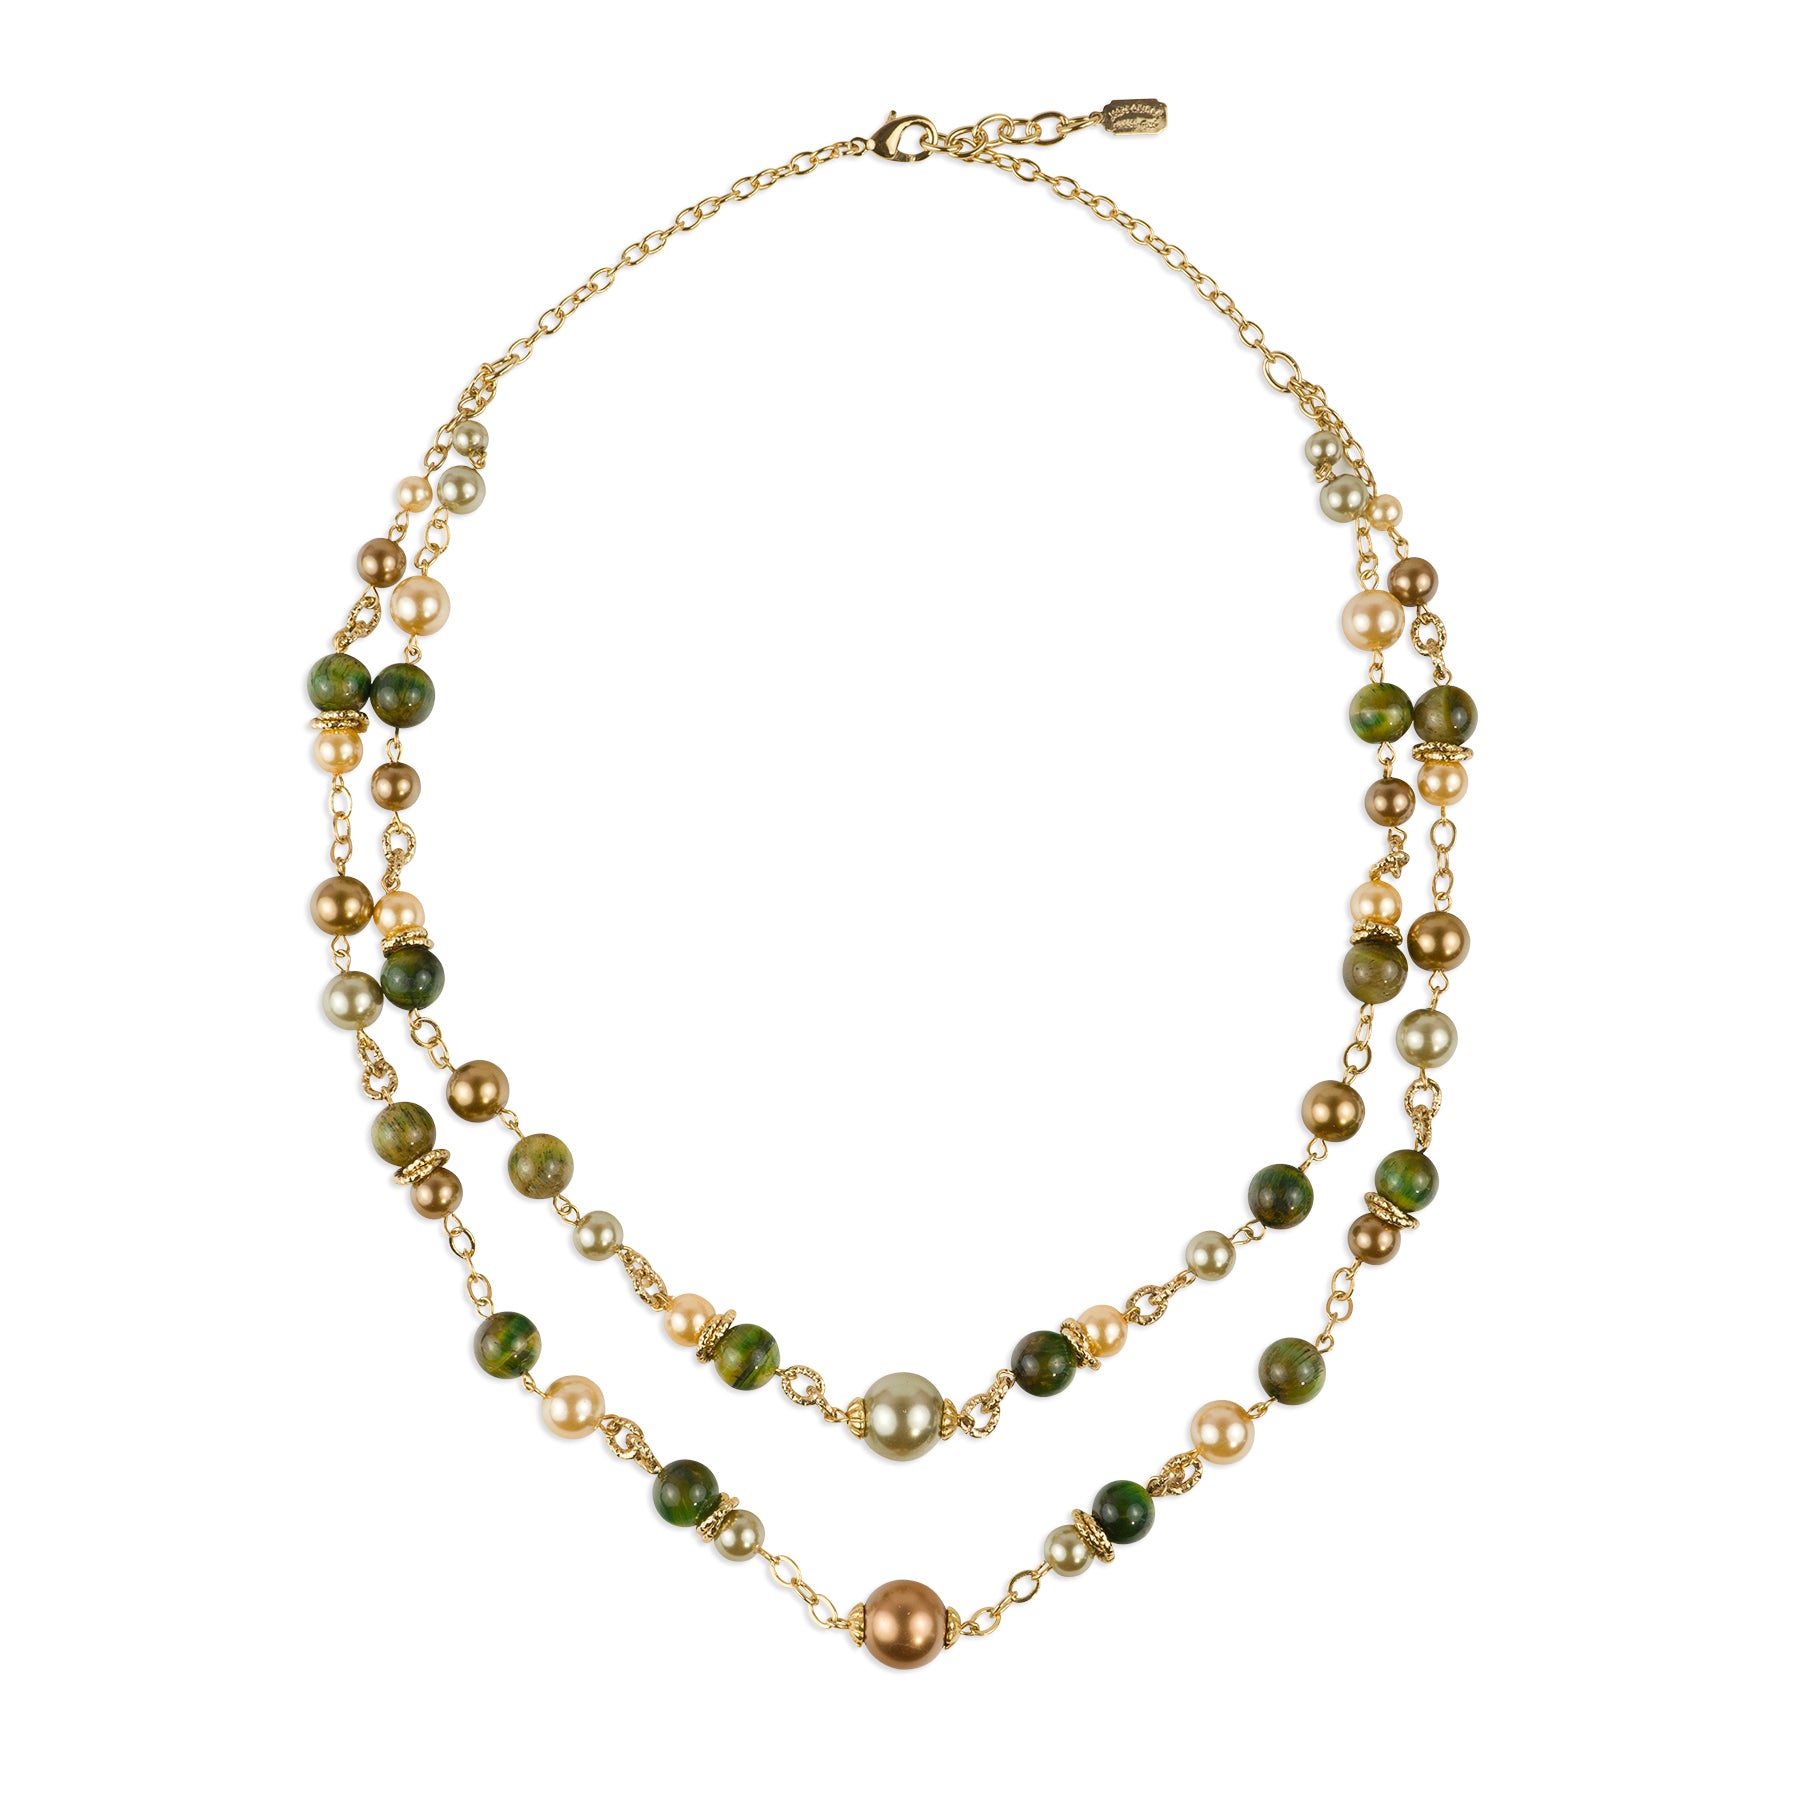 Two-strand choker necklace of semi-precious stones and pearls